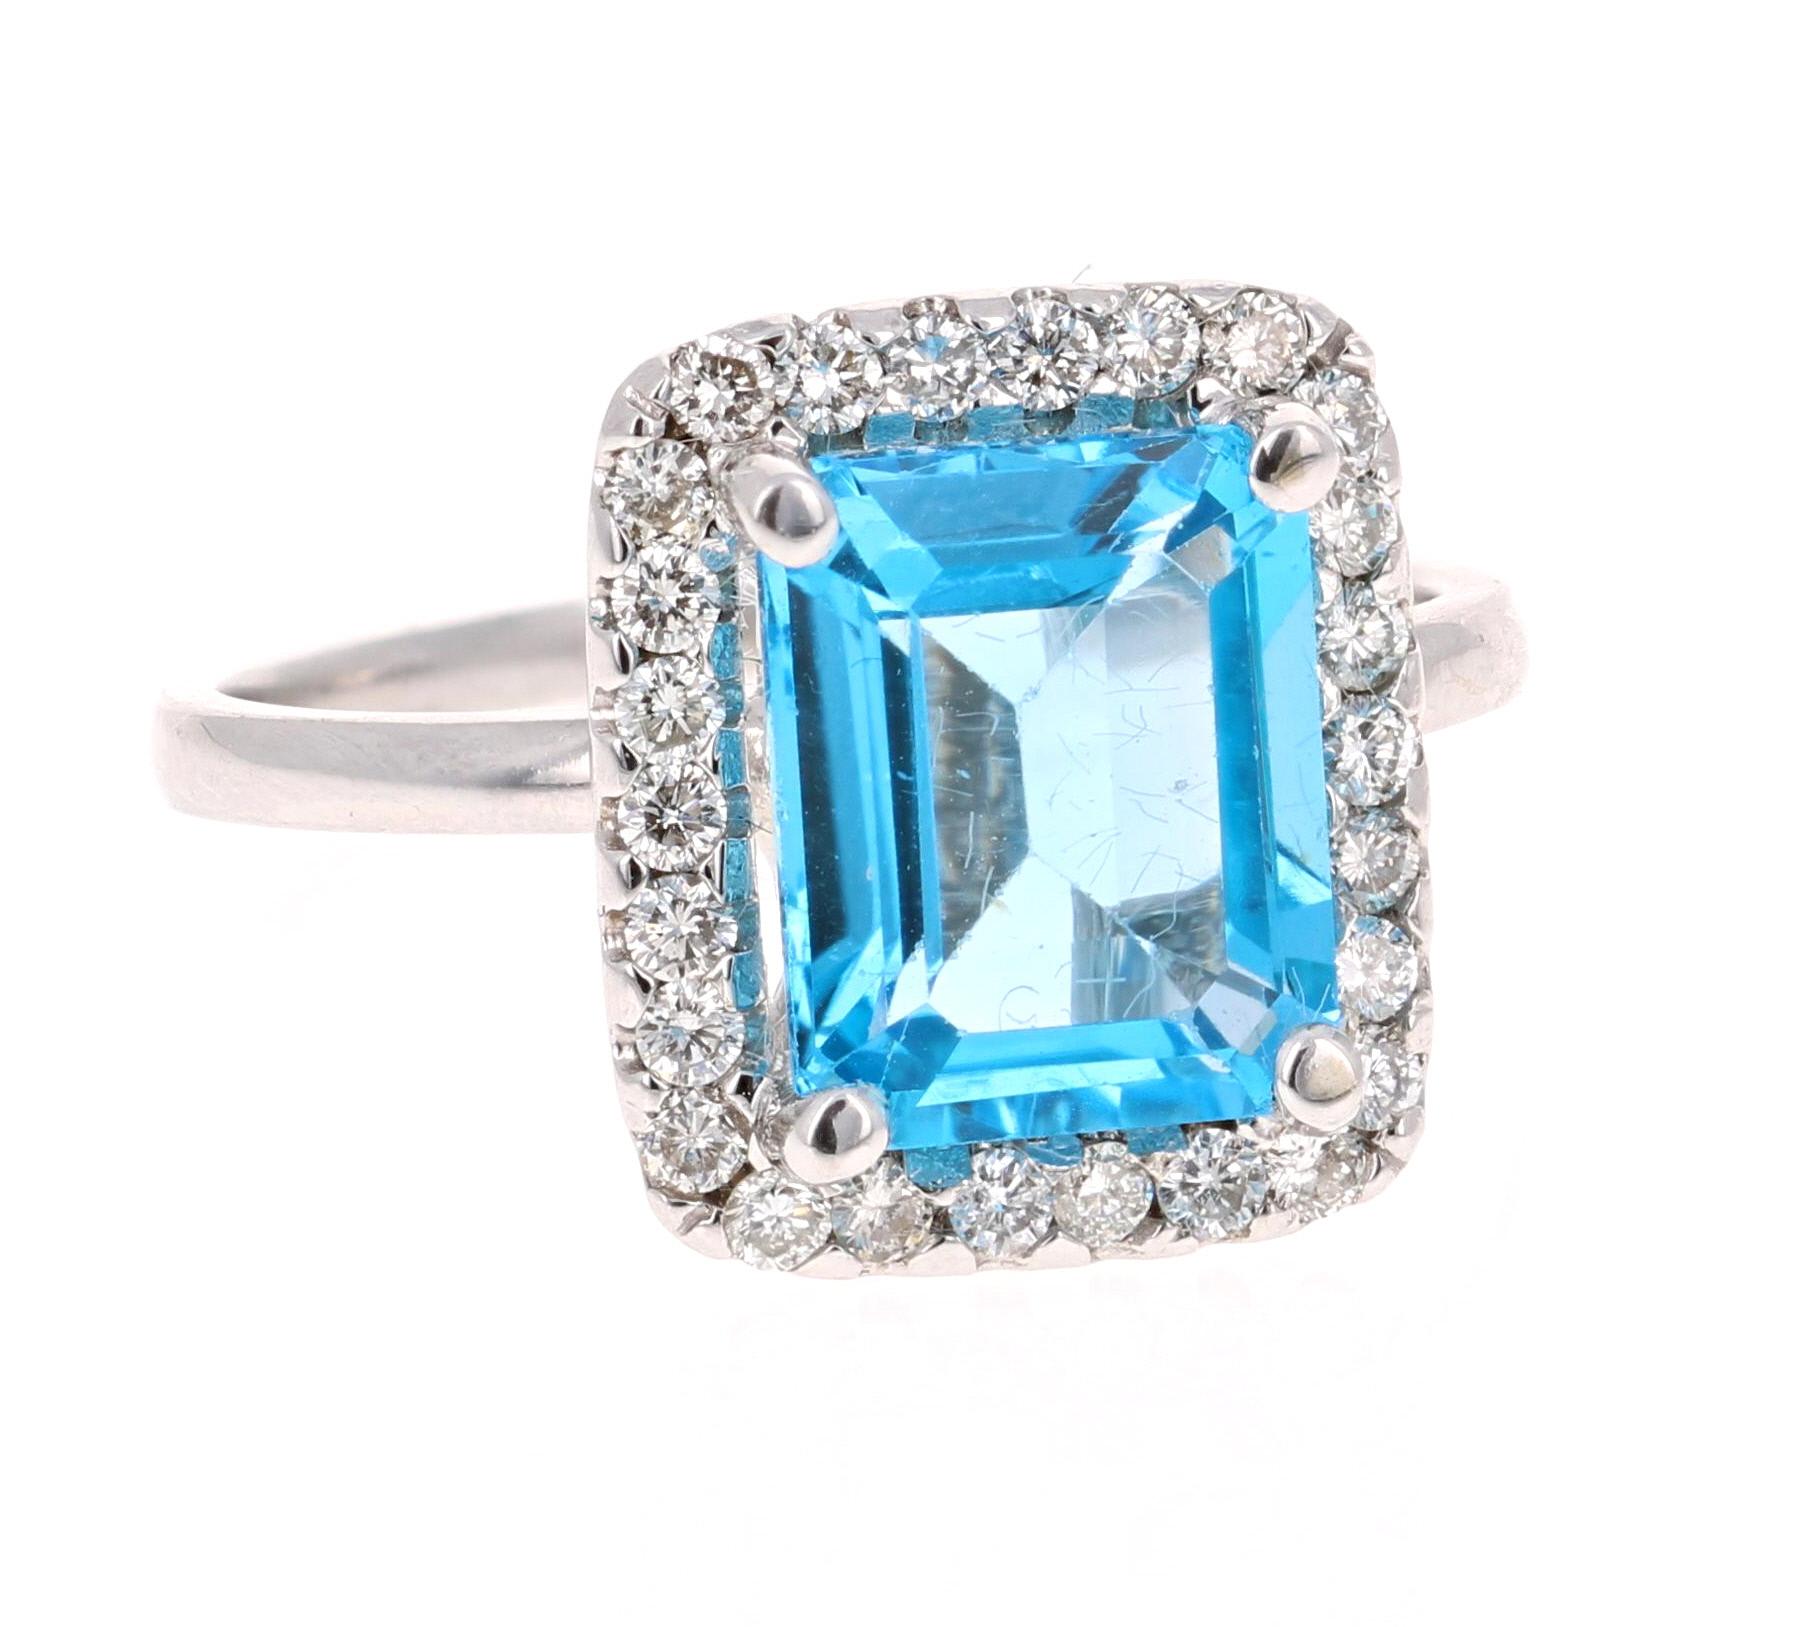 This stunning statement ring has a large Emerald Cut Blue Topaz that weighs 3.94 Carats. 
It is surrounded by a simple halo of 26 Round Cut Diamonds that weigh 0.41 Carats. 

It is crafted in 14 Karat White Gold and weighs approximately 3.7 grams.